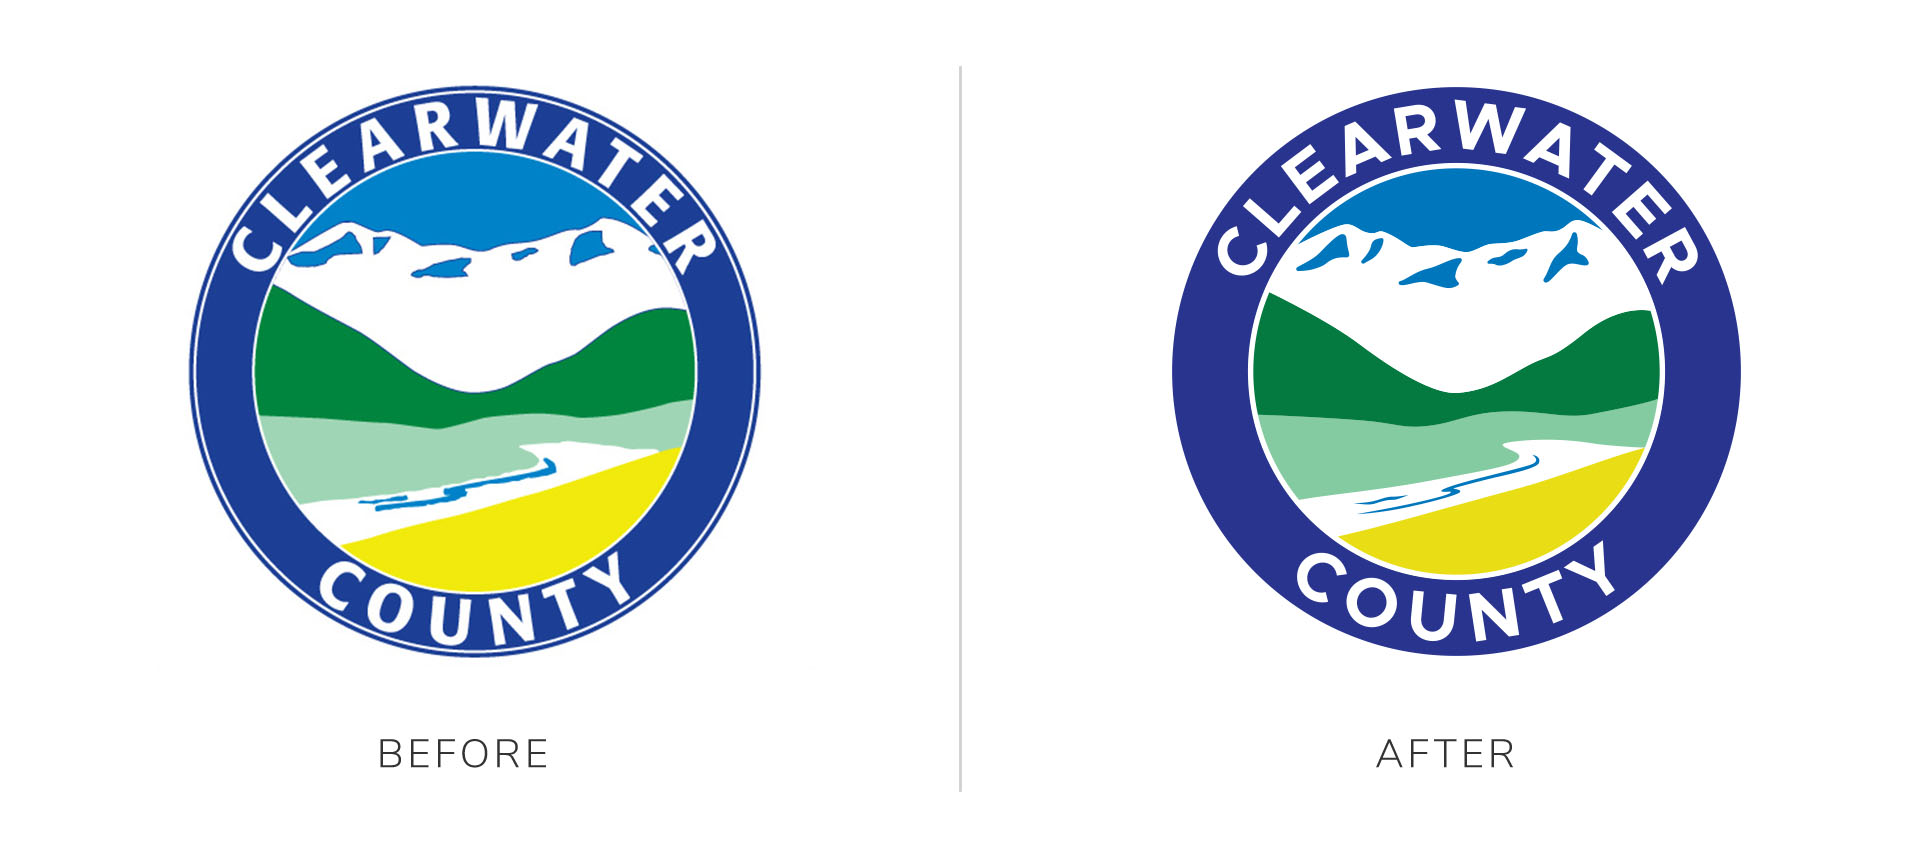 Before and after of Clearwater County's logo